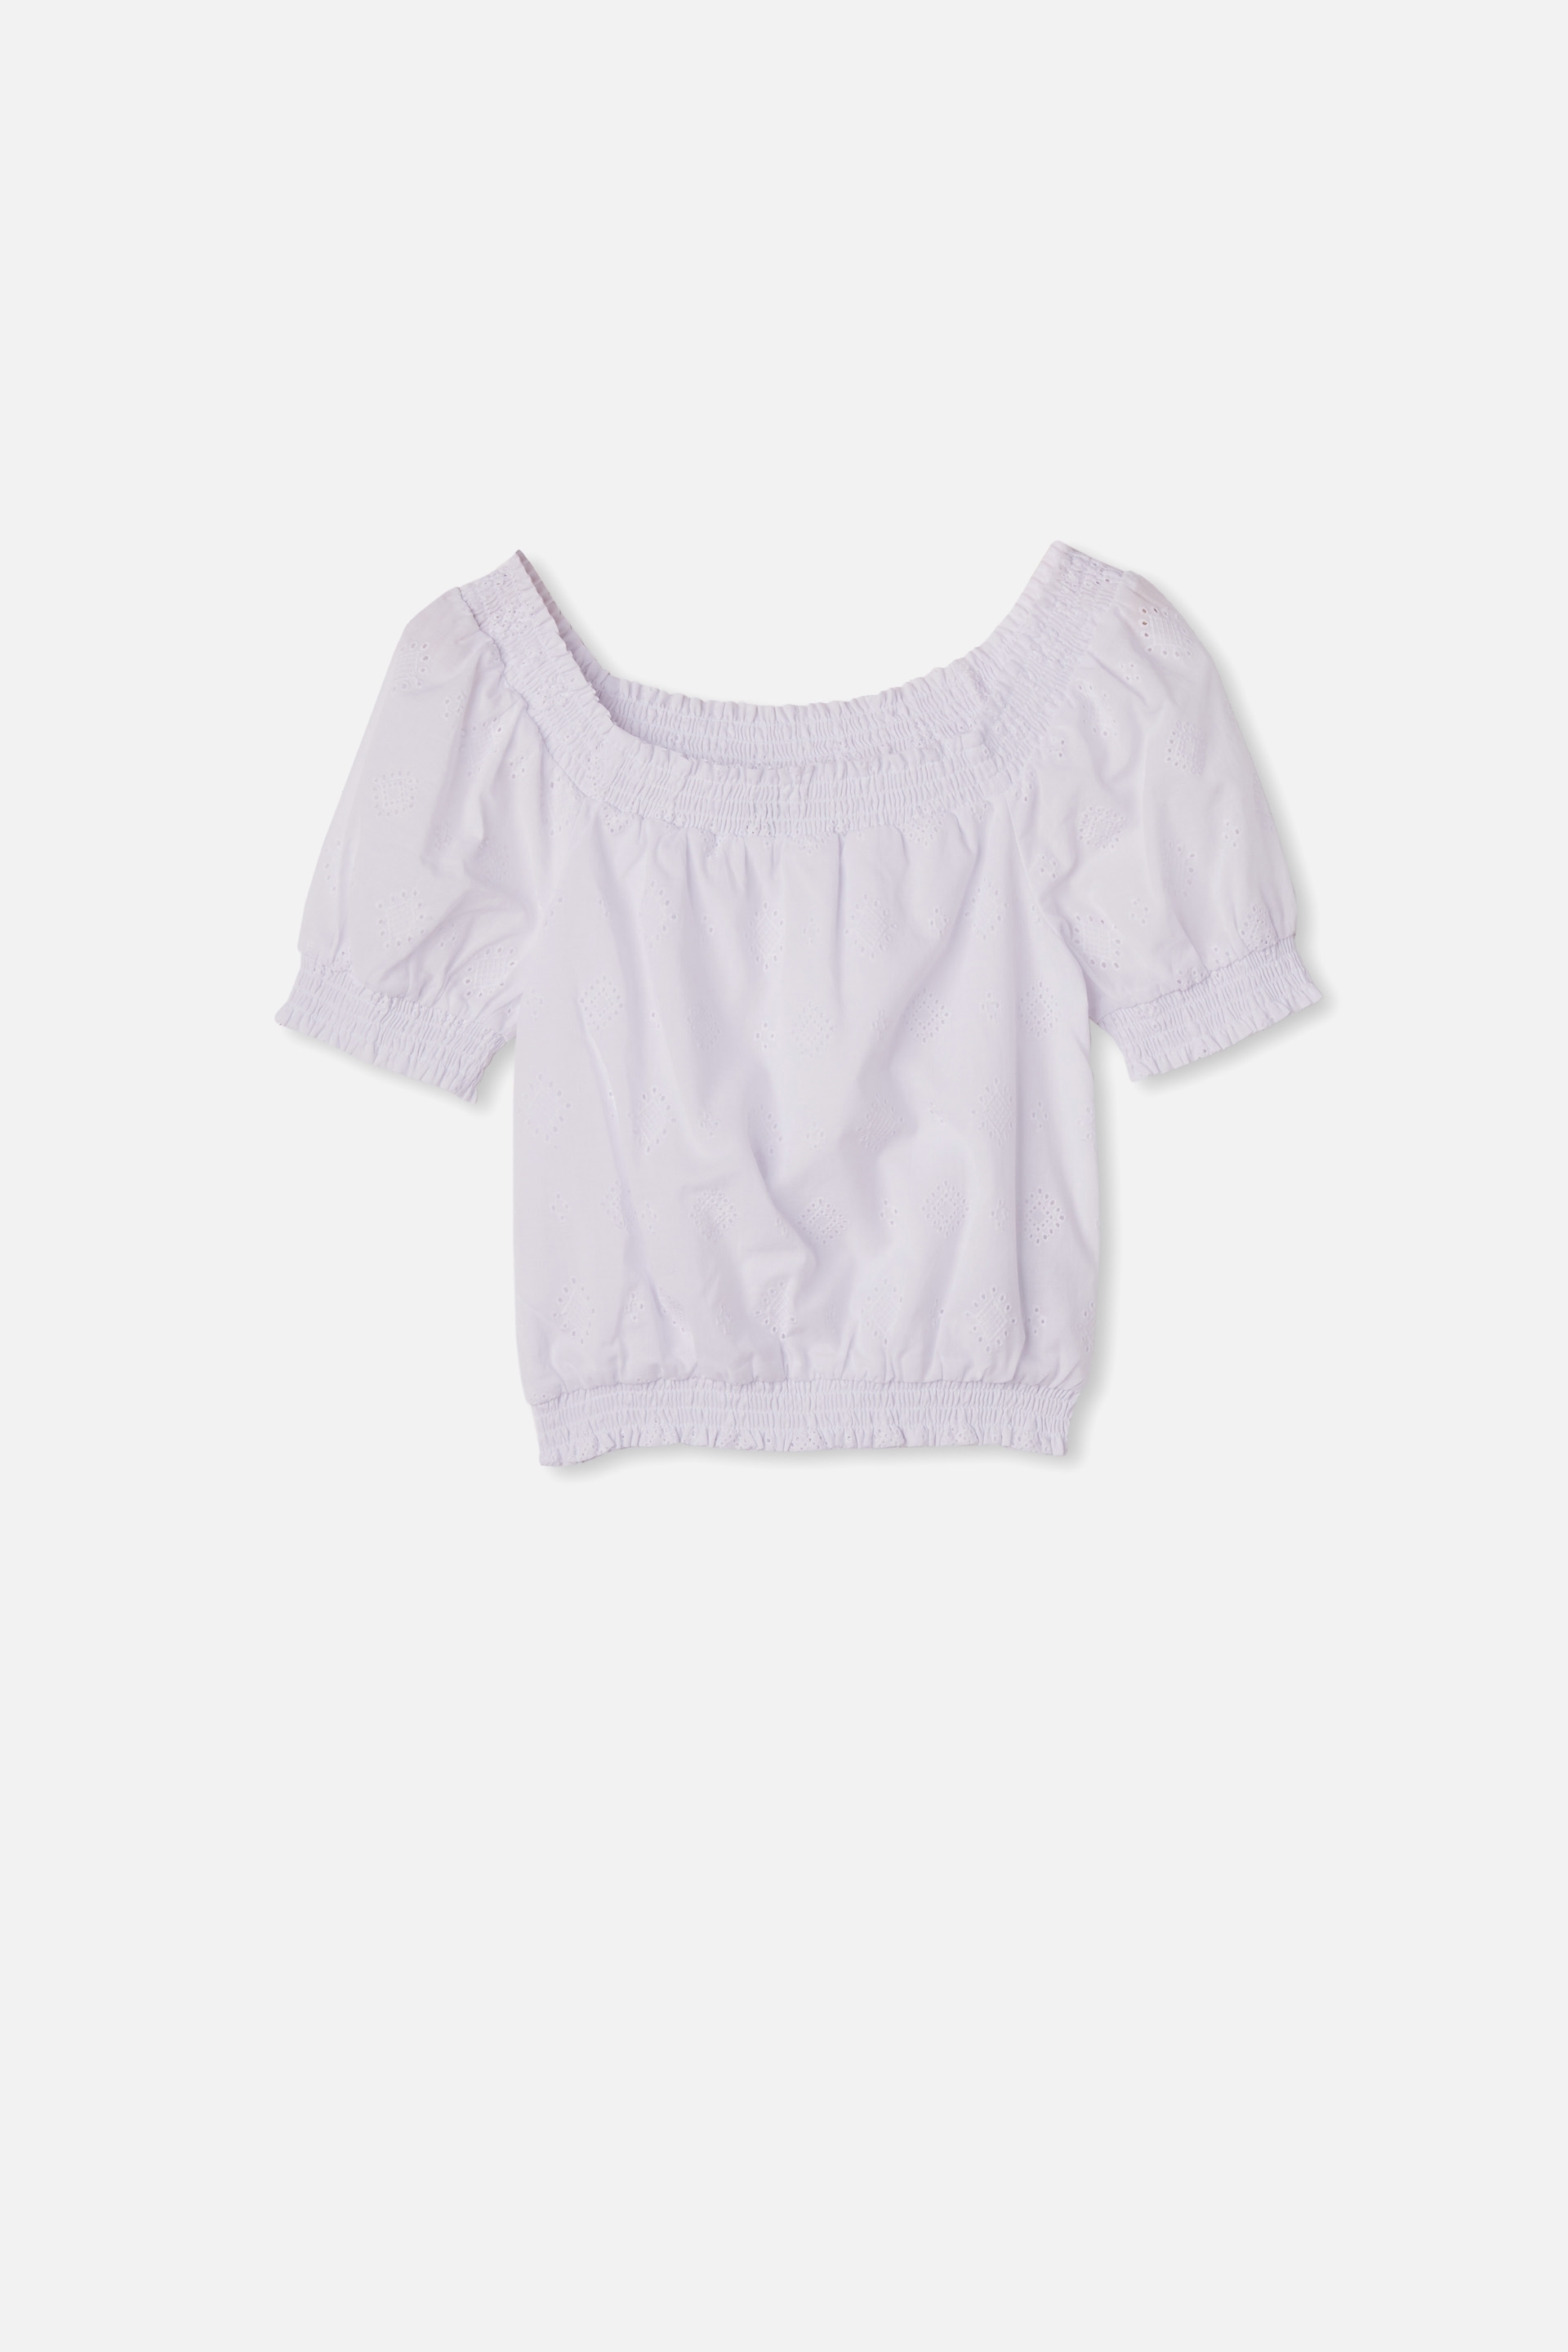 Free by Cotton On - Sasha Broderie Top - White